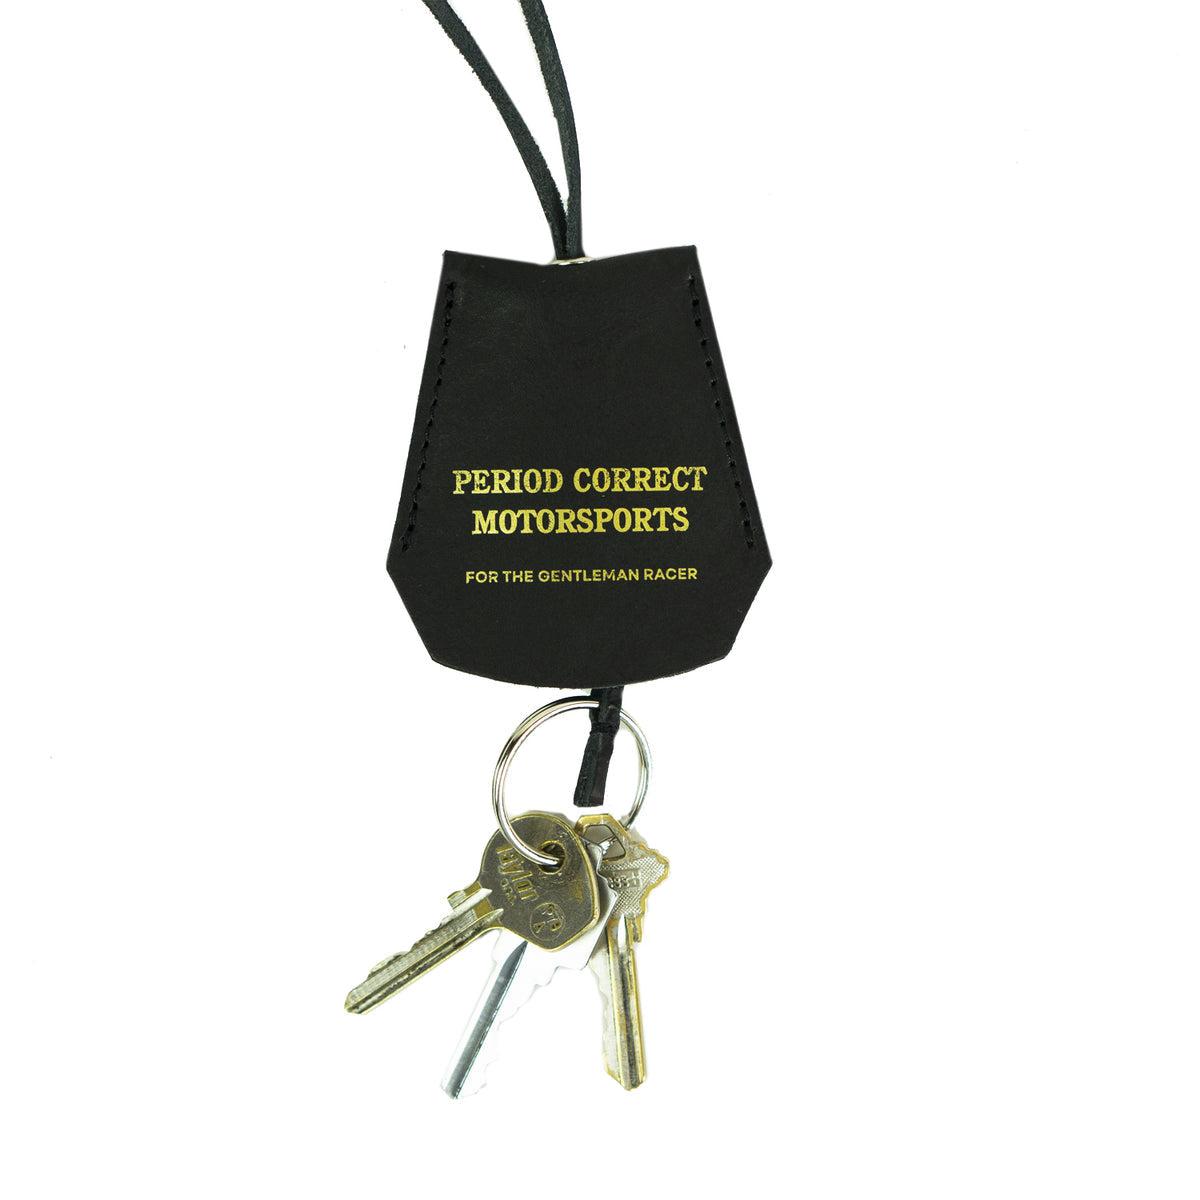 Period Correct | Motorsports Leather Key Cover-Key Cover-Period Correct-gpx-store